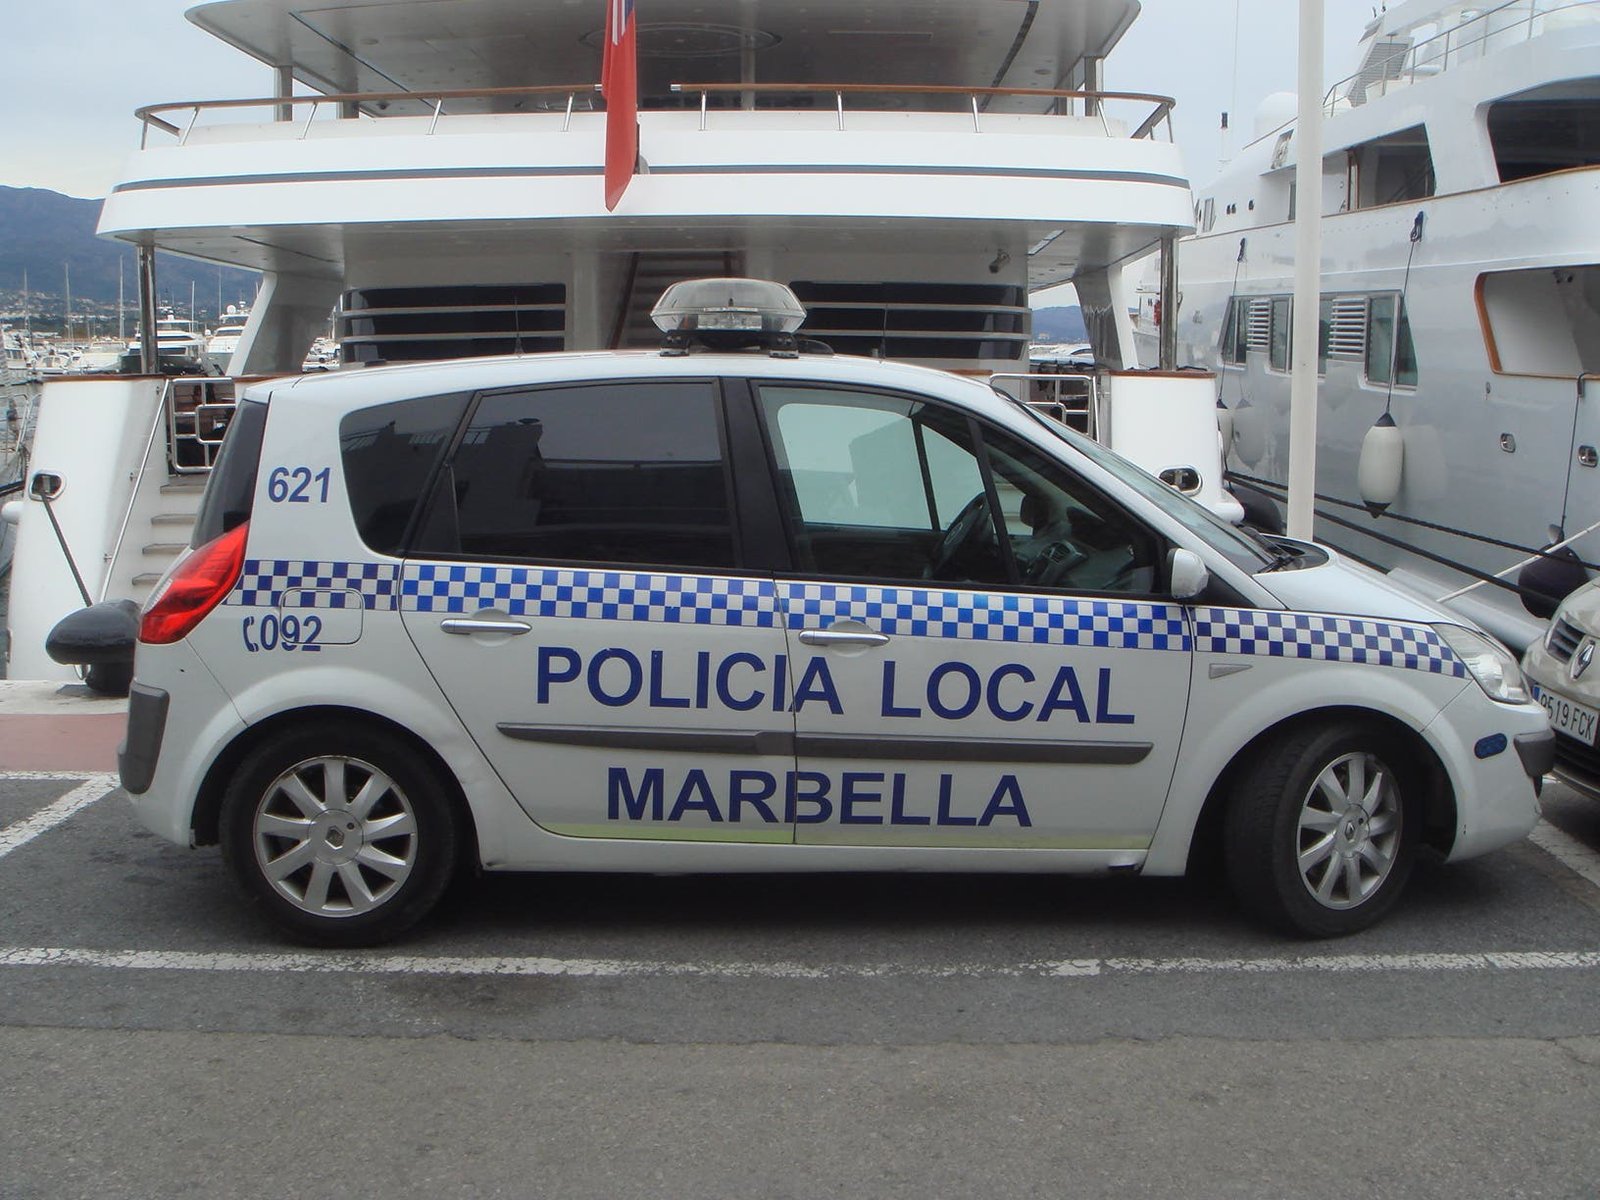 Tragic End: Man's Life Cut Short in High-Speed Chase, Marbella's A-7 Motorway Witnesses Hor - policia local marbella 1 - Marbella News Crime -